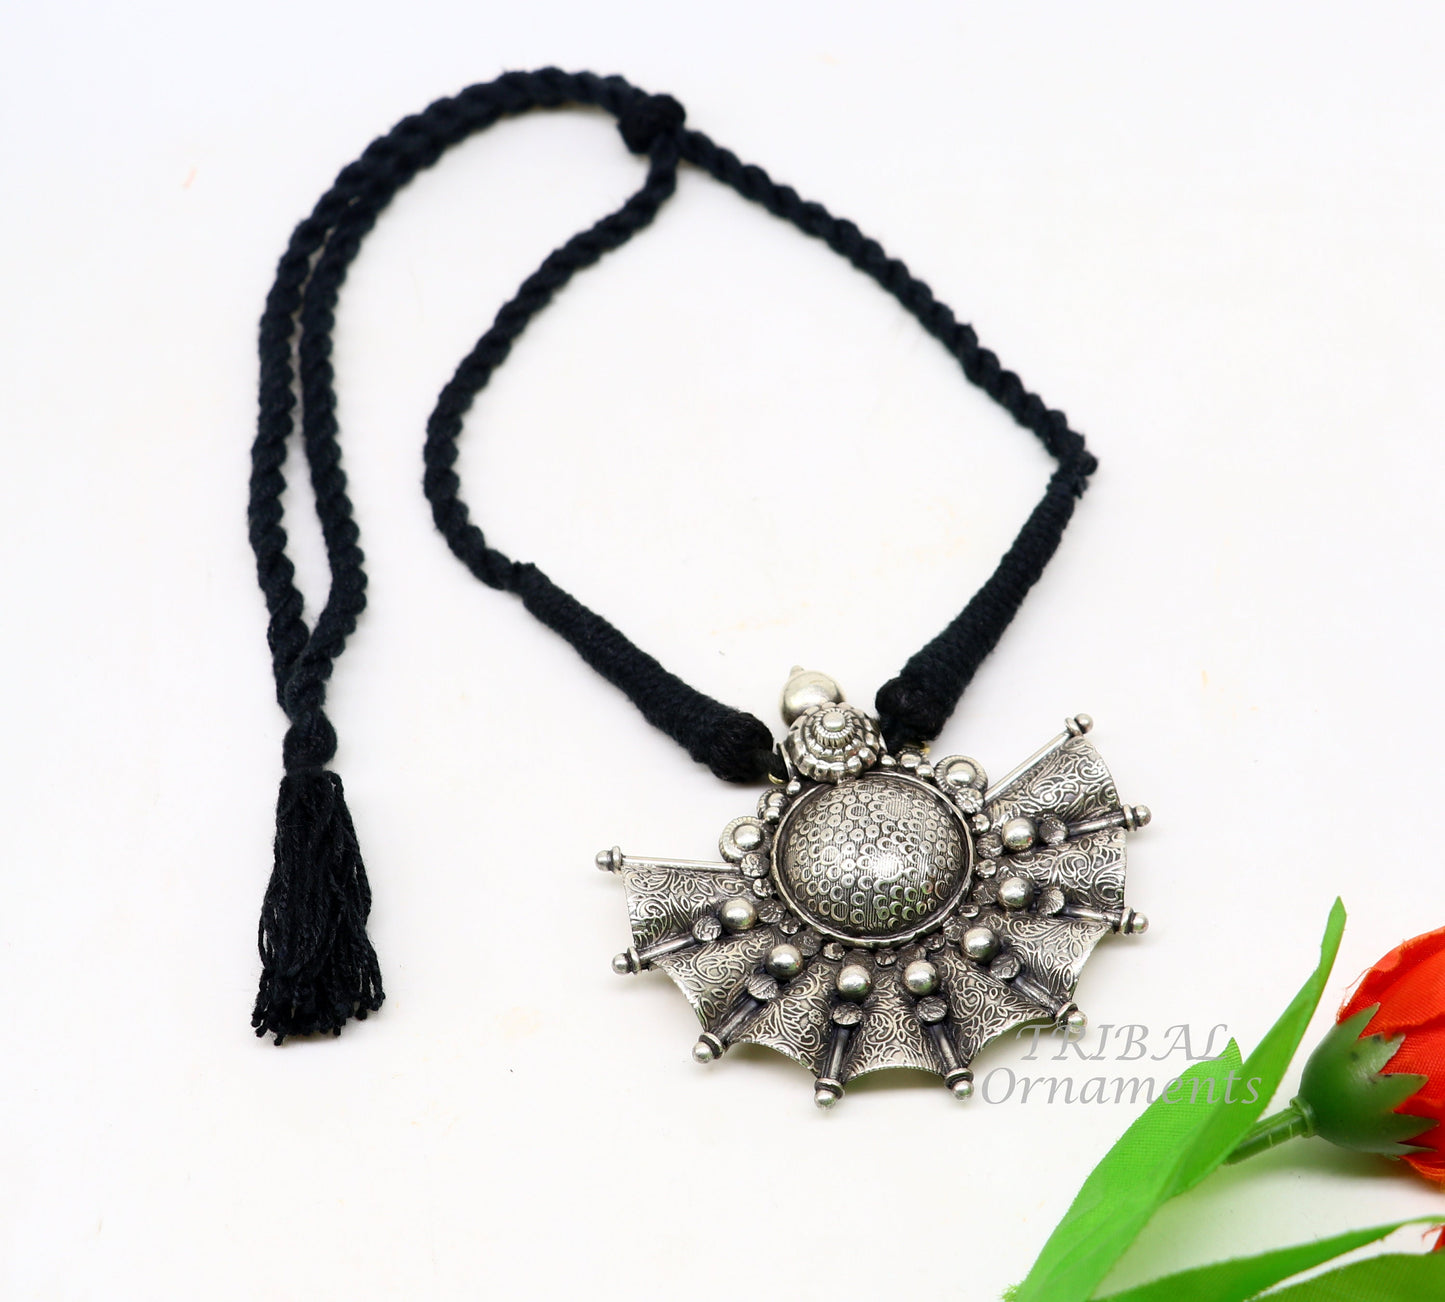 925 sterling silver handmade vintage ethnic style fabulous unique design pendant necklace best belly dance ethnic garba jewelry nsp506 - TRIBAL ORNAMENTS